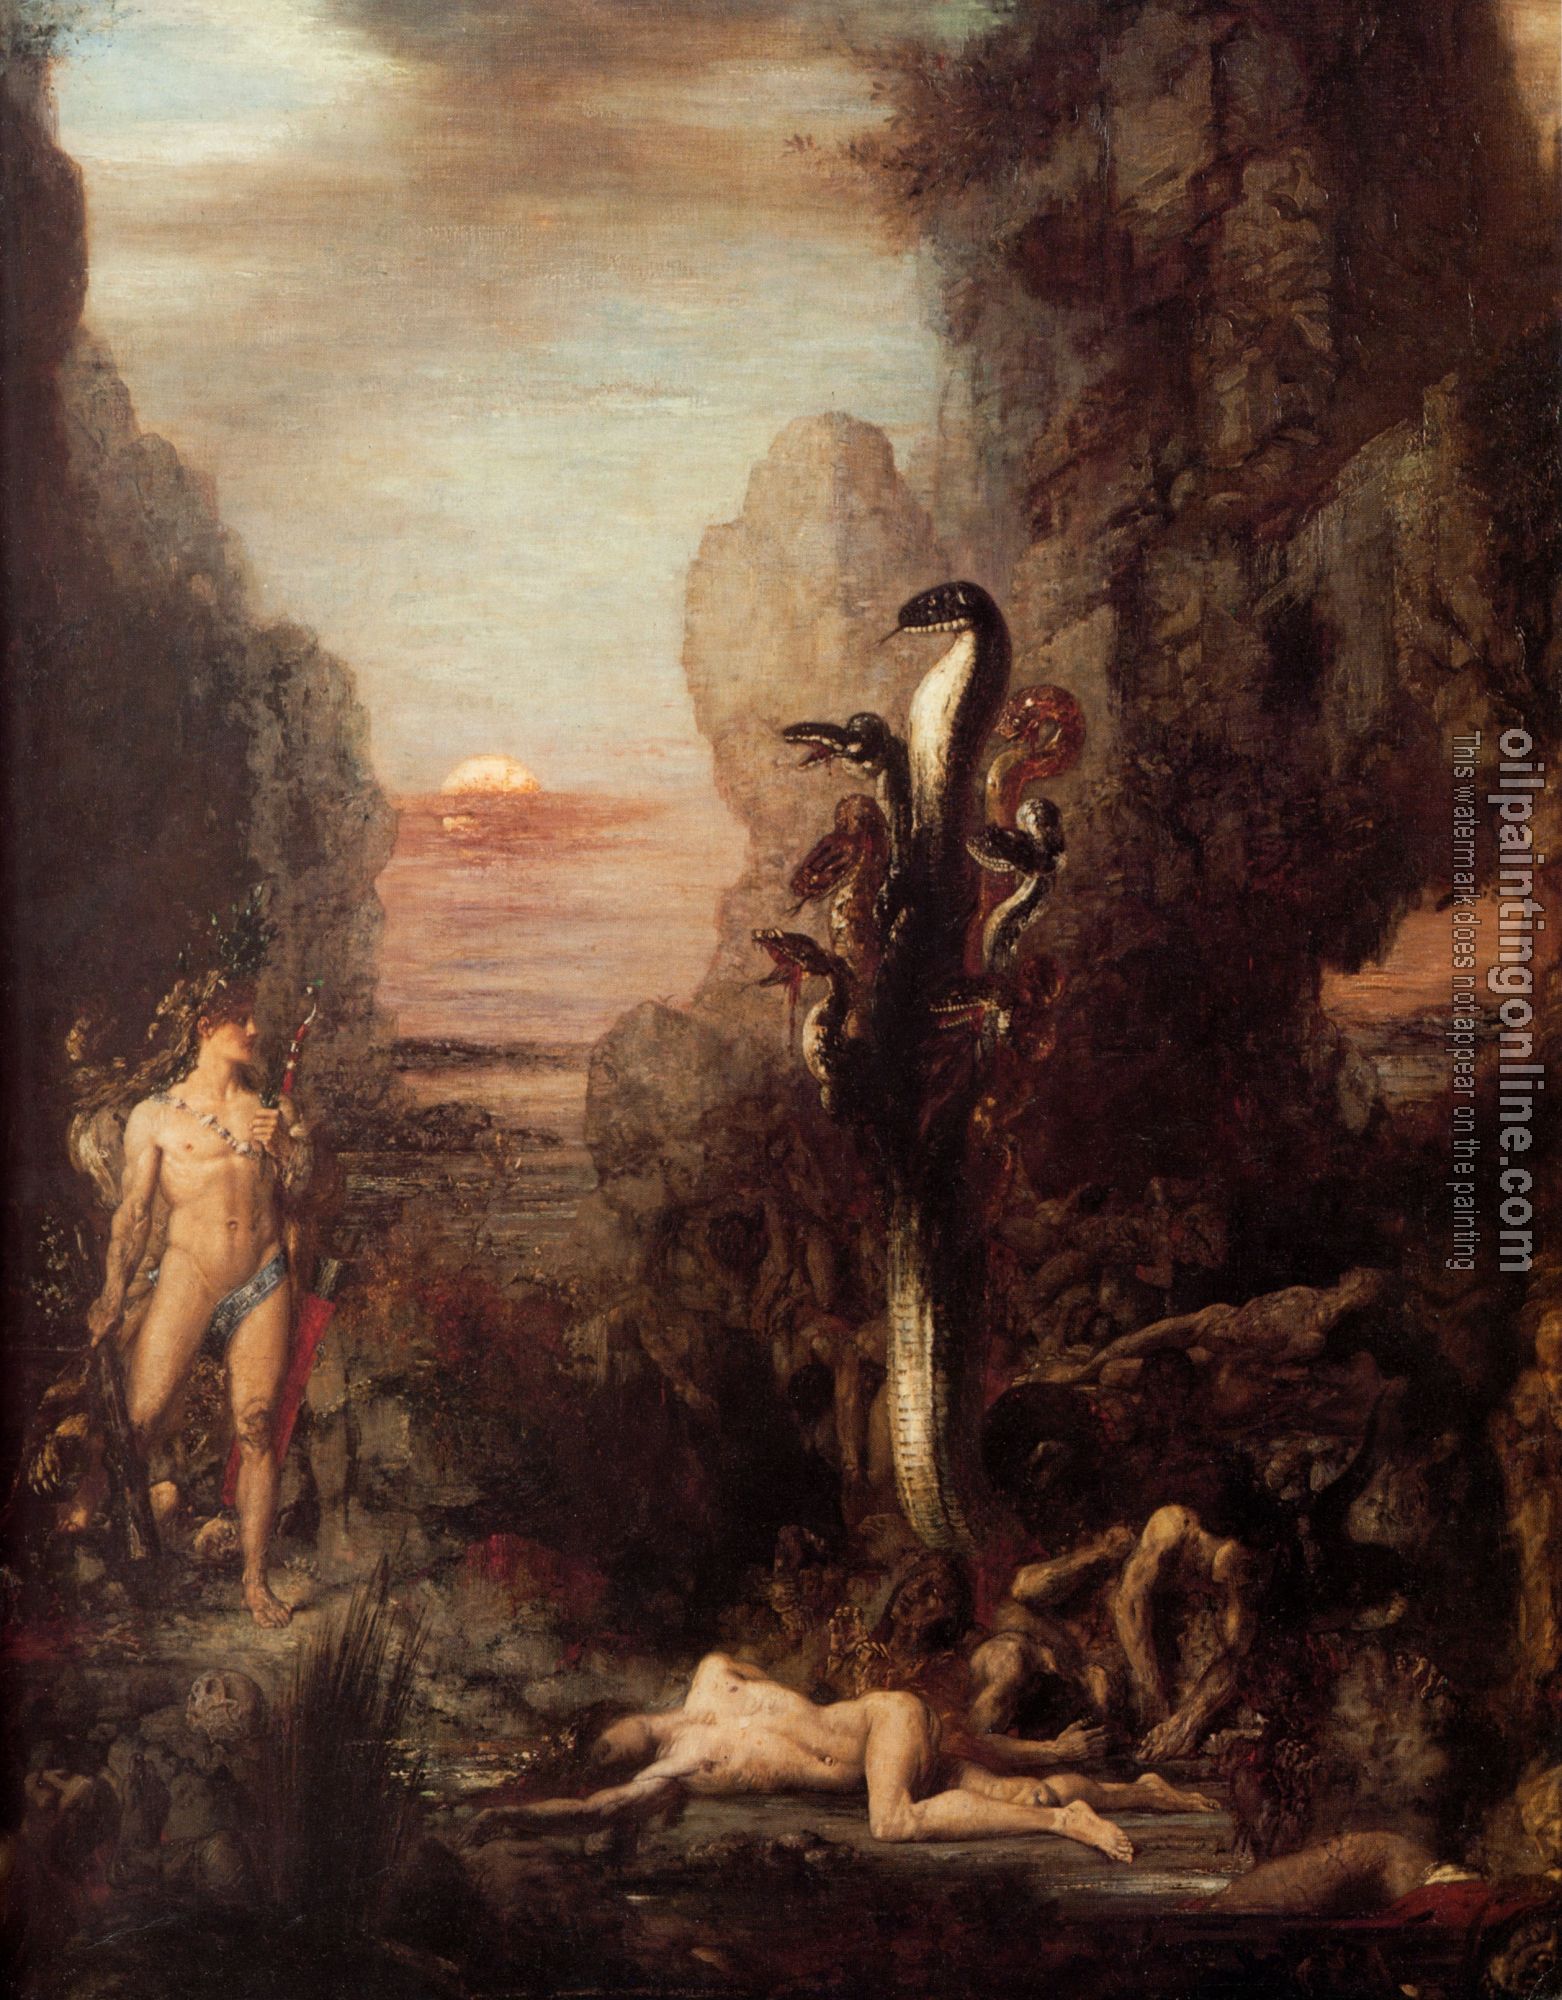 Moreau, Gustave - Hercules and the Hydra